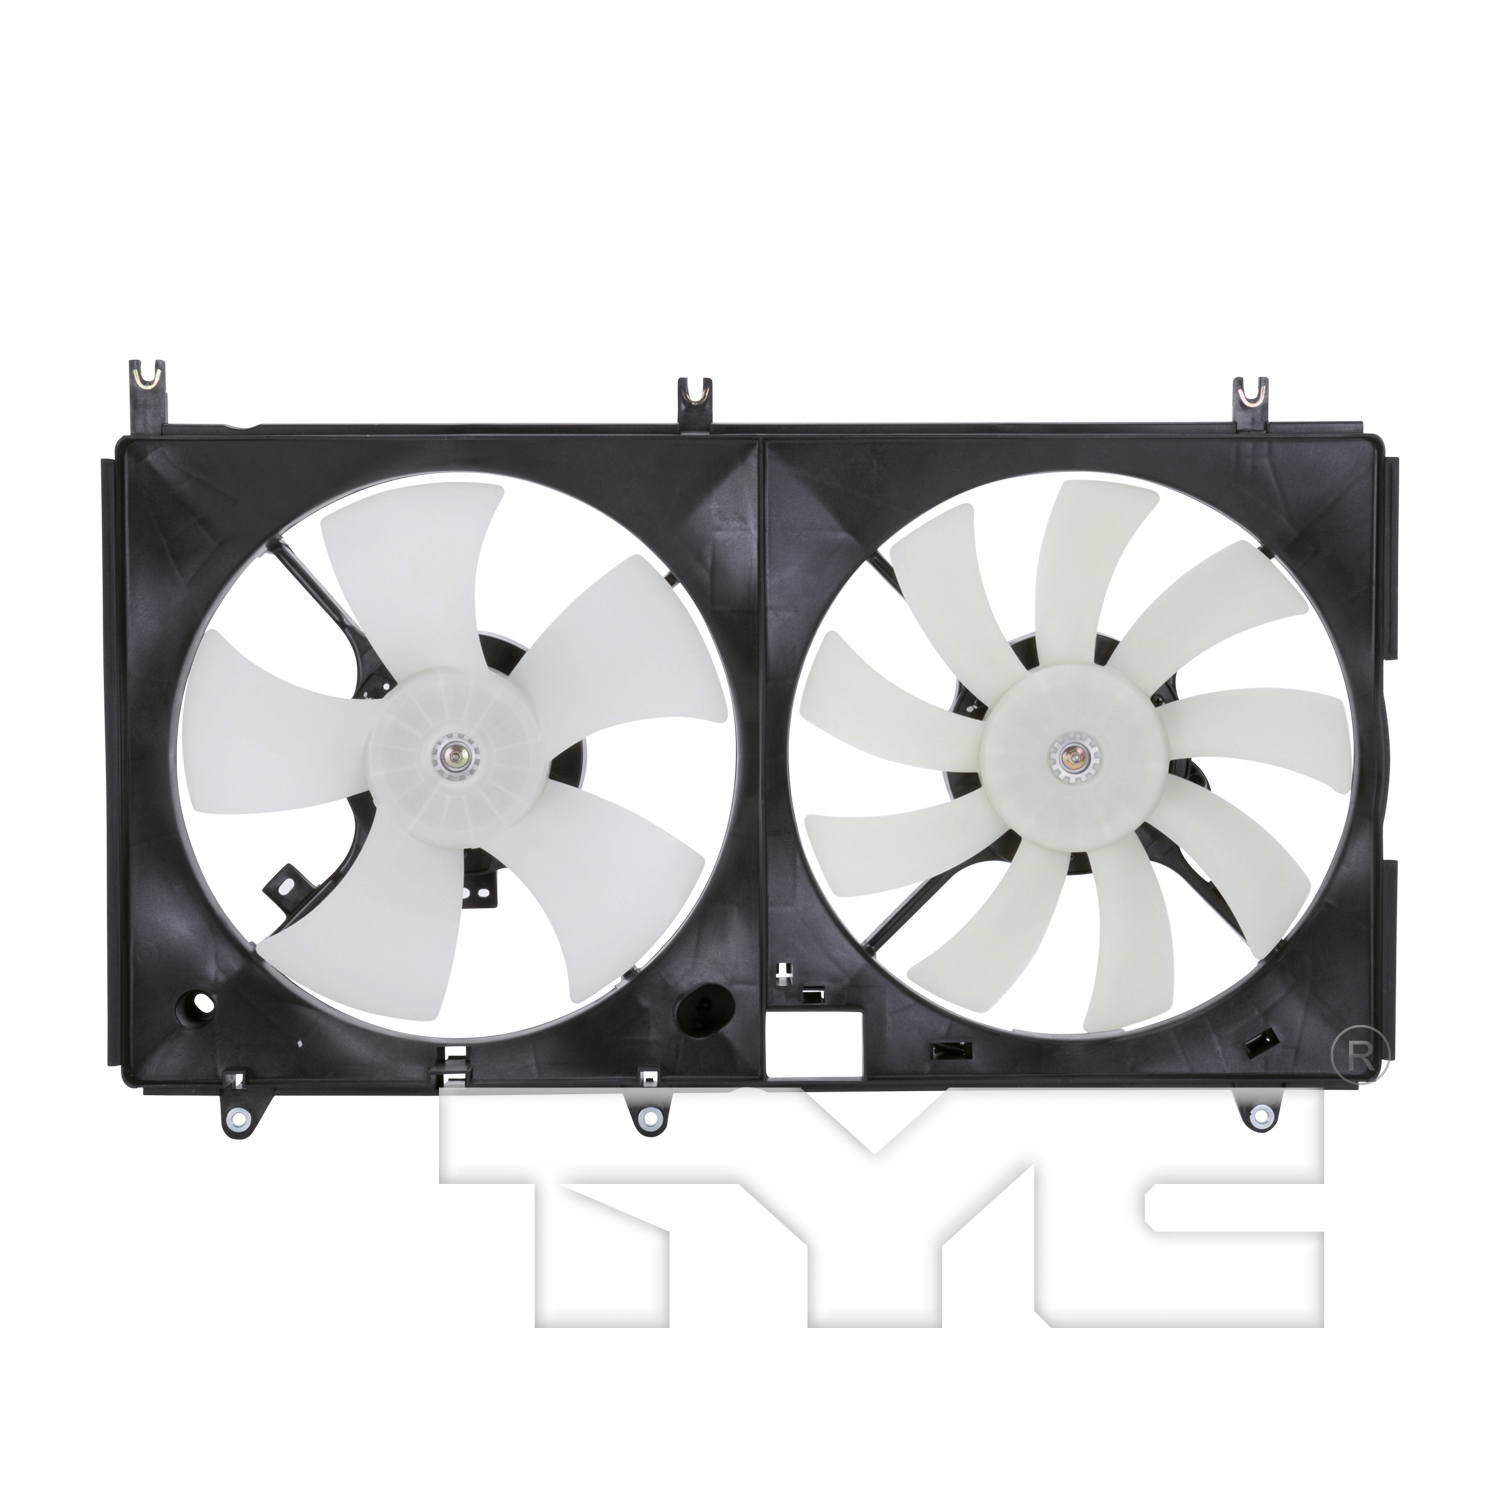 Aftermarket FAN ASSEMBLY/FAN SHROUDS for MITSUBISHI - GALANT, GALANT,04-12,Radiator cooling fan assy